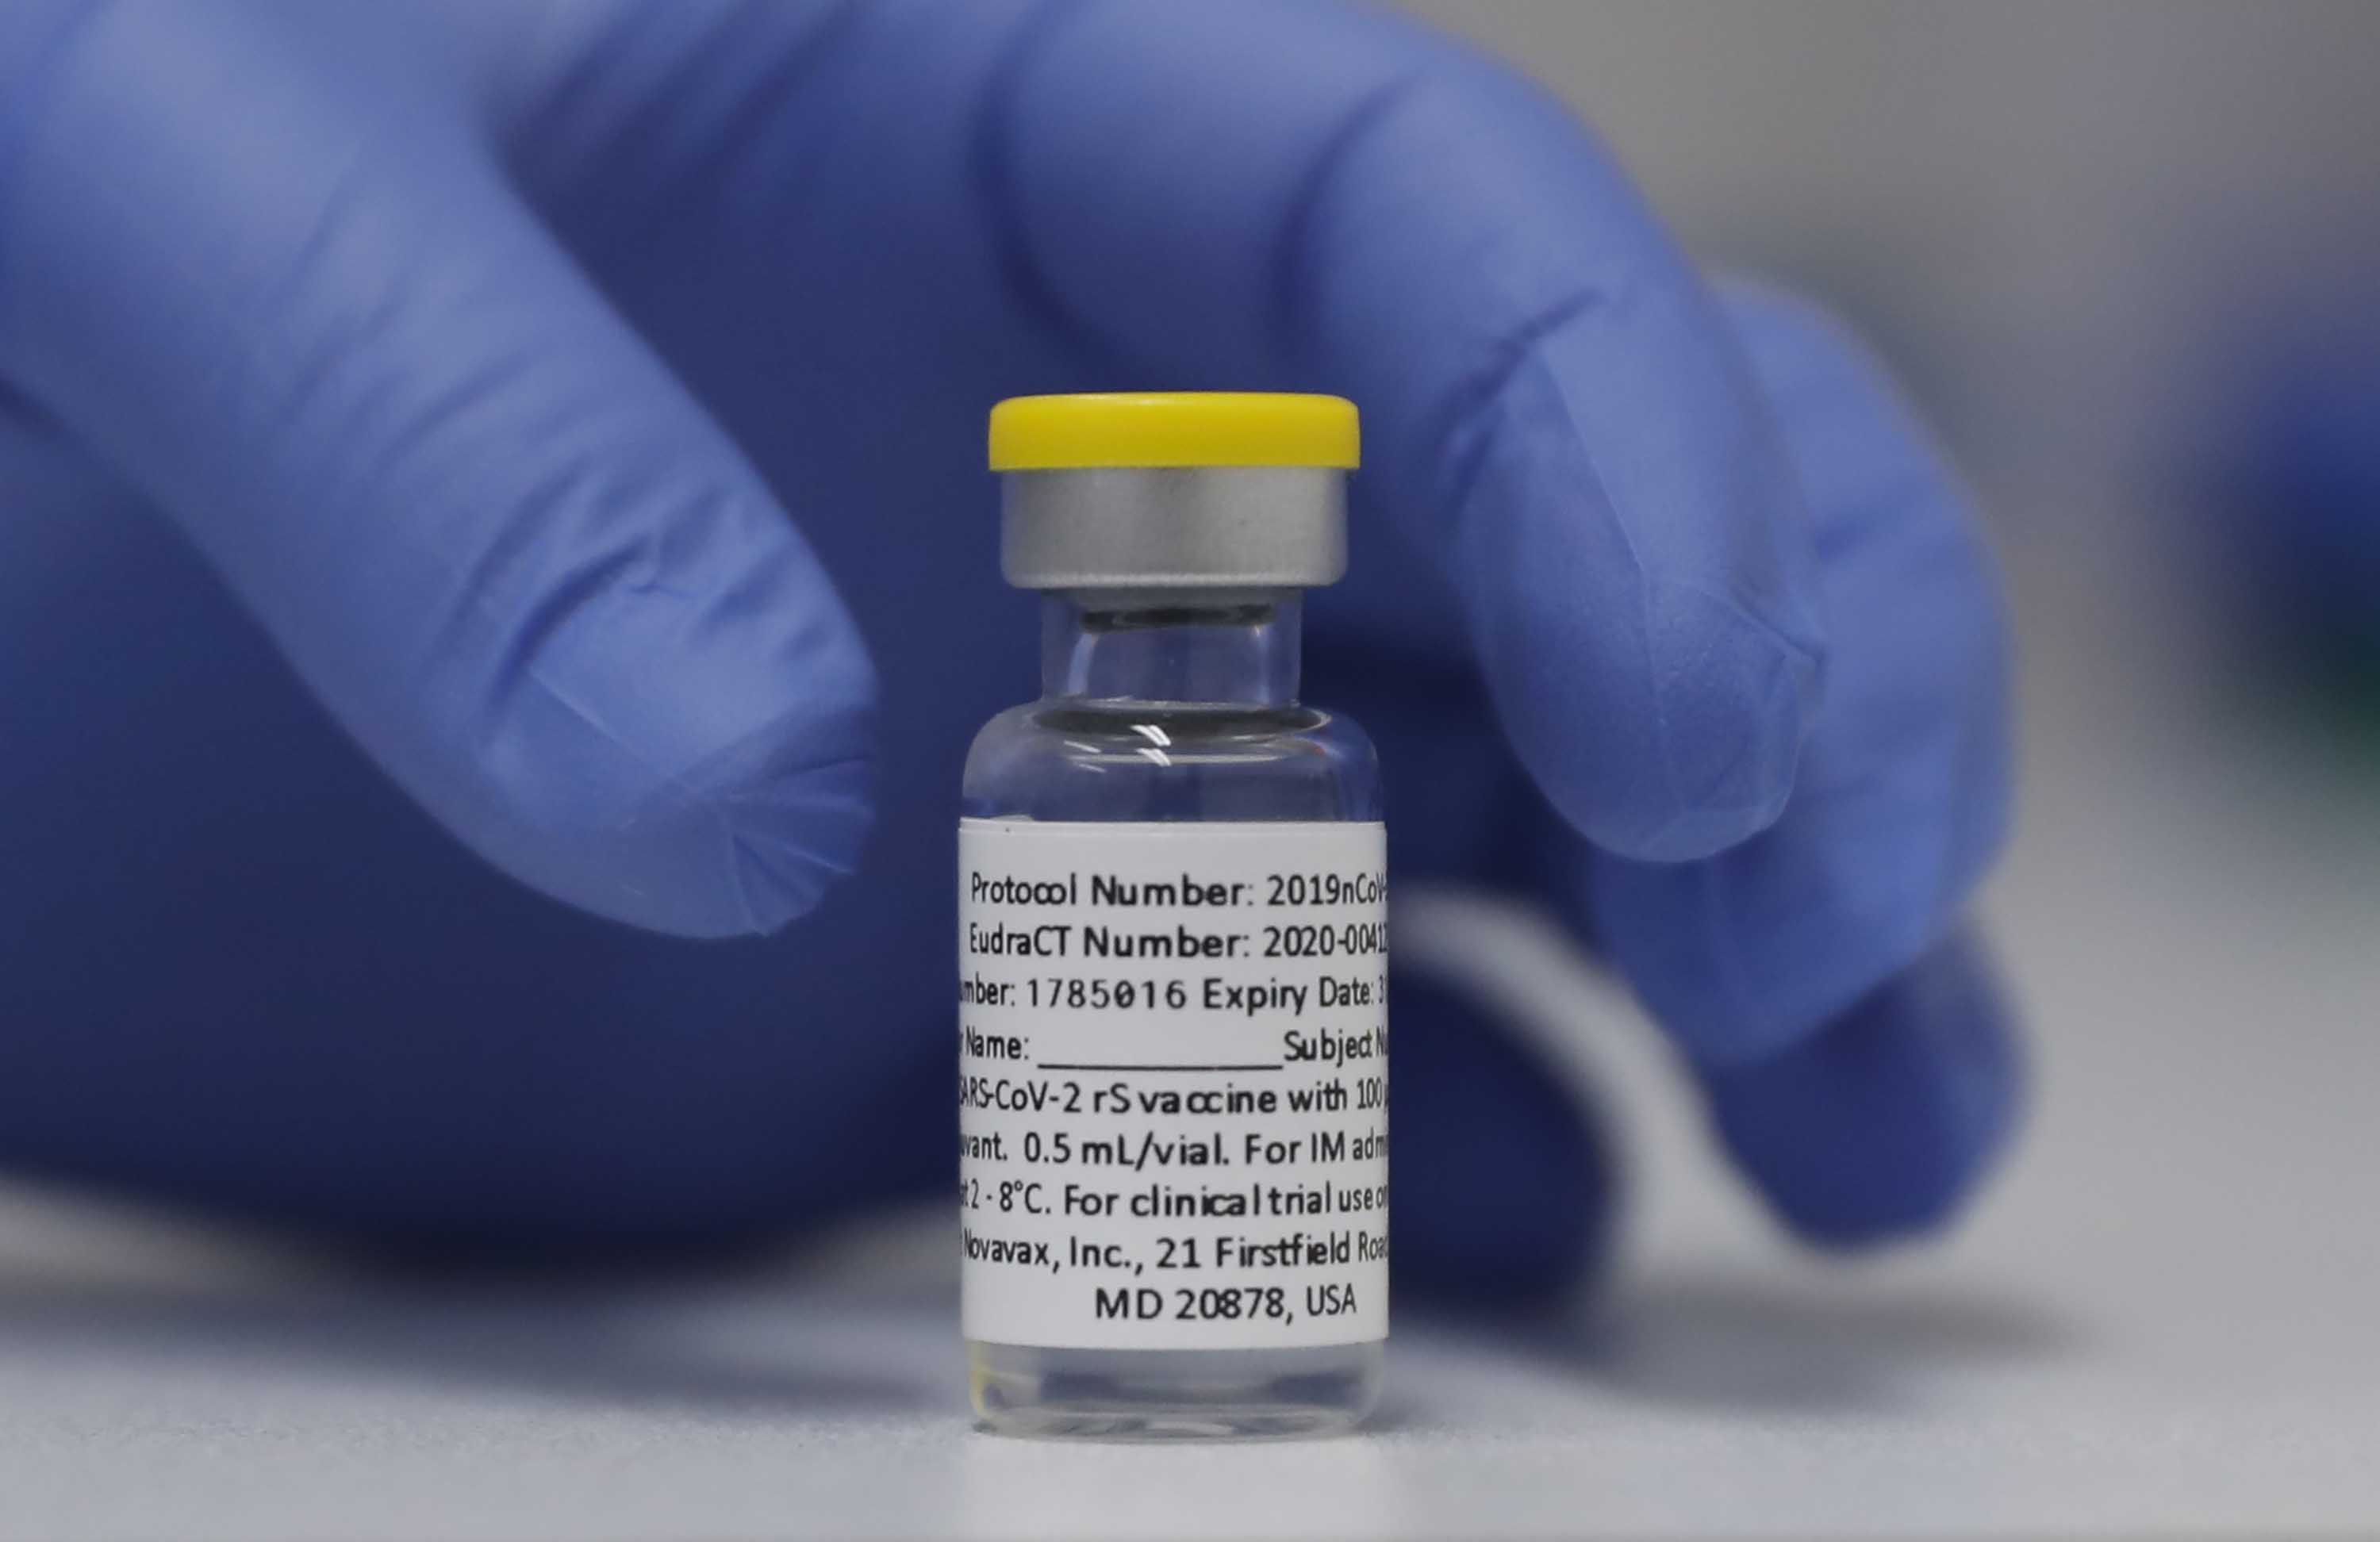 A vial of the Phase 3 Novavax coronavirus vaccine is seen ready for use during a trial at St. George's University hospital in London in October Oct. 7, 2020. Novavax Inc. said Thursday Jan. 28, 2021 that its COVID-19 vaccine appears 89% effective based on early findings from a British study and that it also seems to work — though not as well — against new mutated strains of the virus circulating in that country and South Africa. (AP Photo/Alastair Grant)